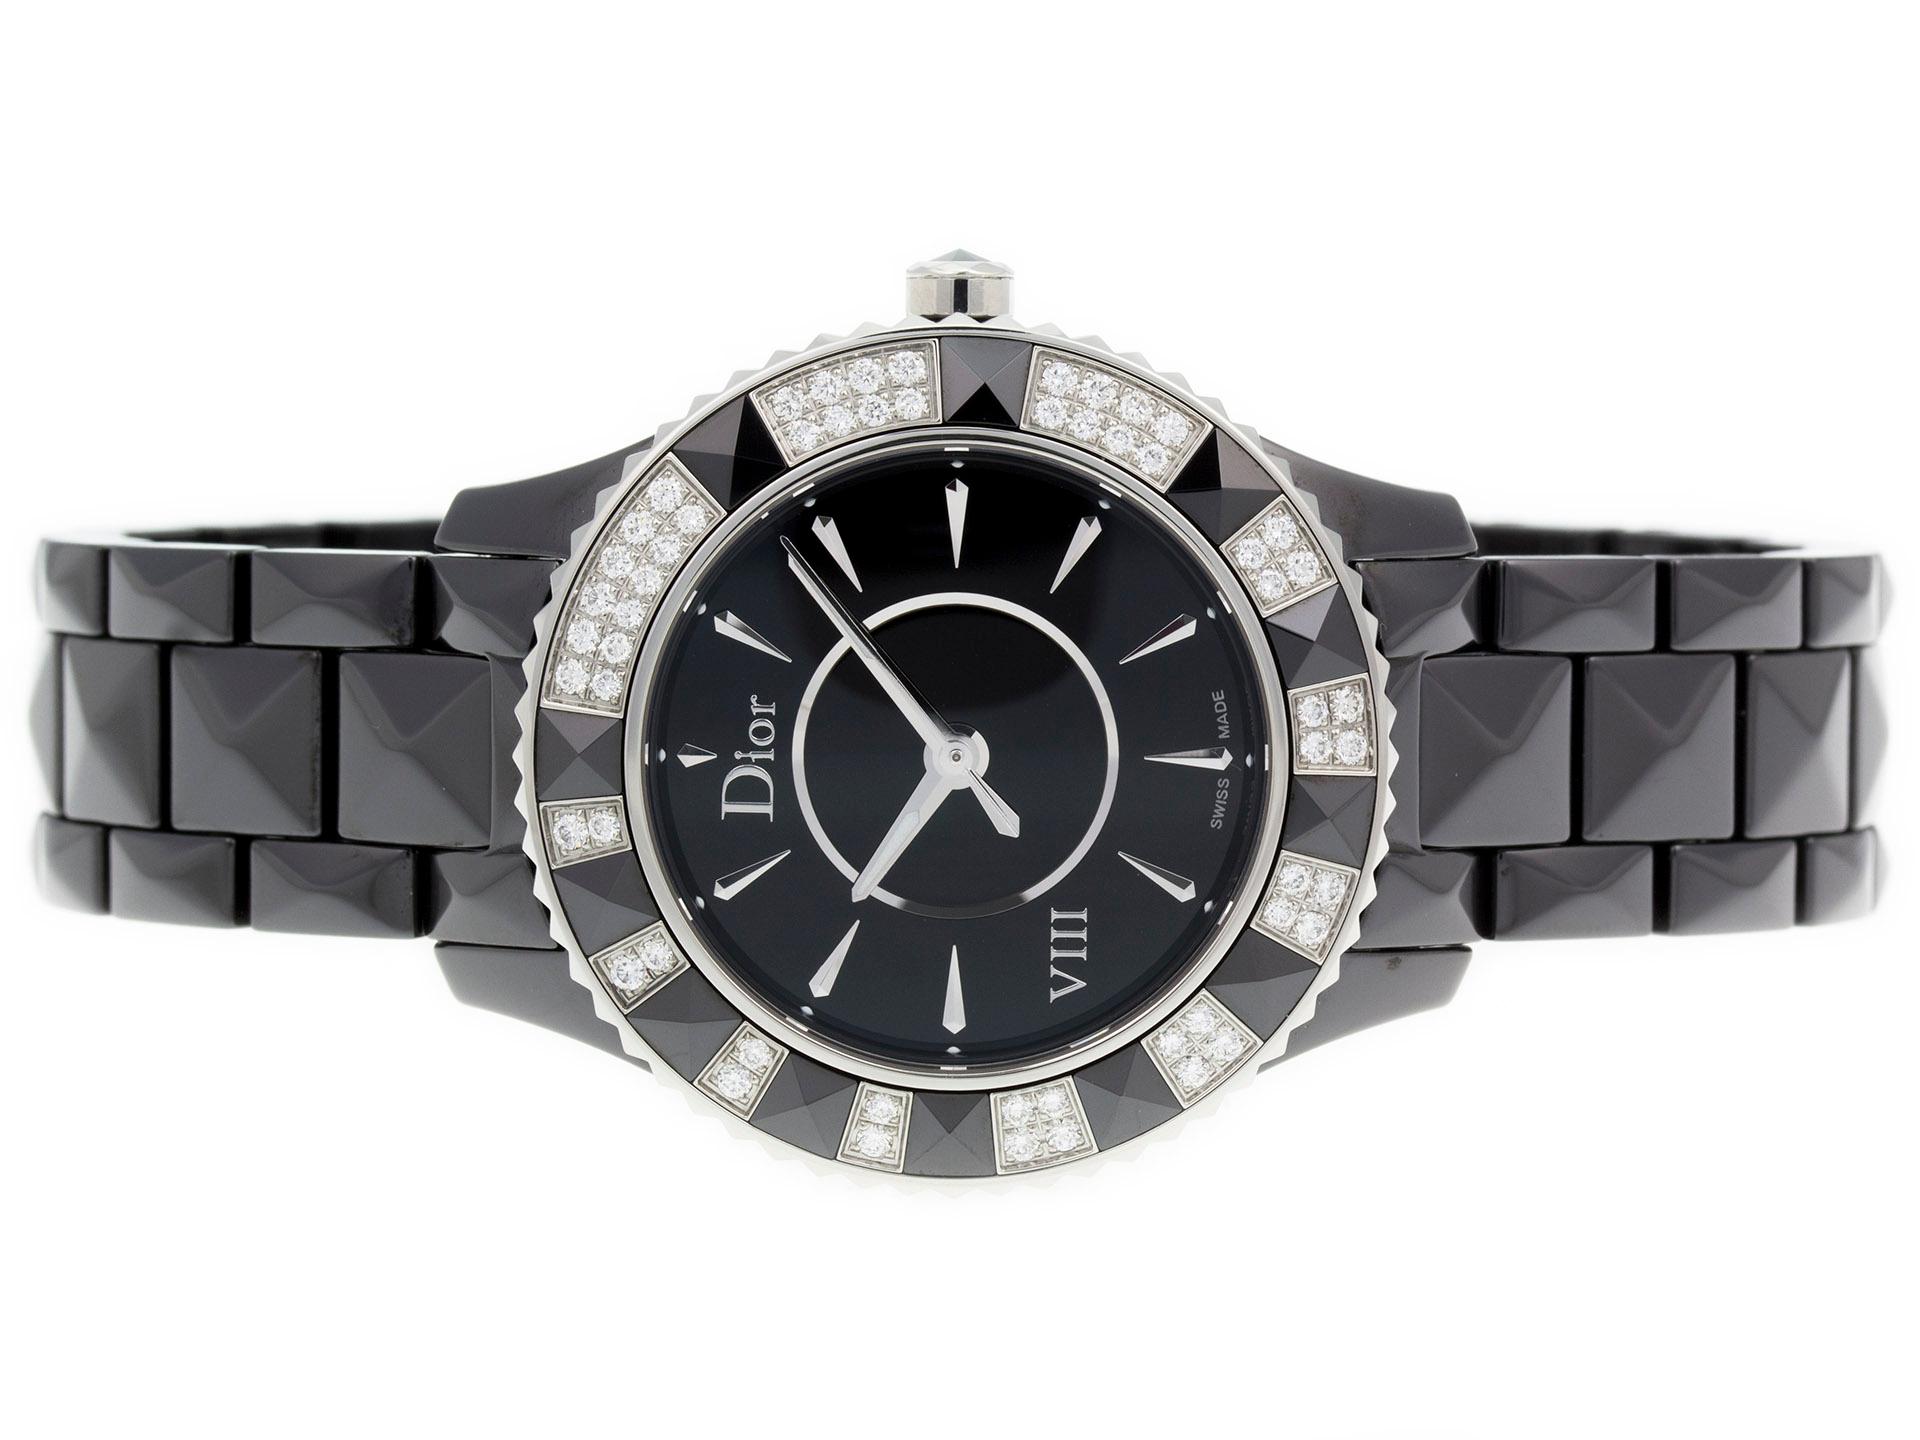 Brand:	Christian Dior	
Movement:	Swiss Quartz Battery
Series:	Dior VIII	
Functions:	Hour, Minute, Second
Model #:	CD1231E1C001	
Gender:	Ladies'
Condition:	Excellent Display Model, Faint Scratches on Case	
Dial Markers:	Black Dial w/ Steel Stick